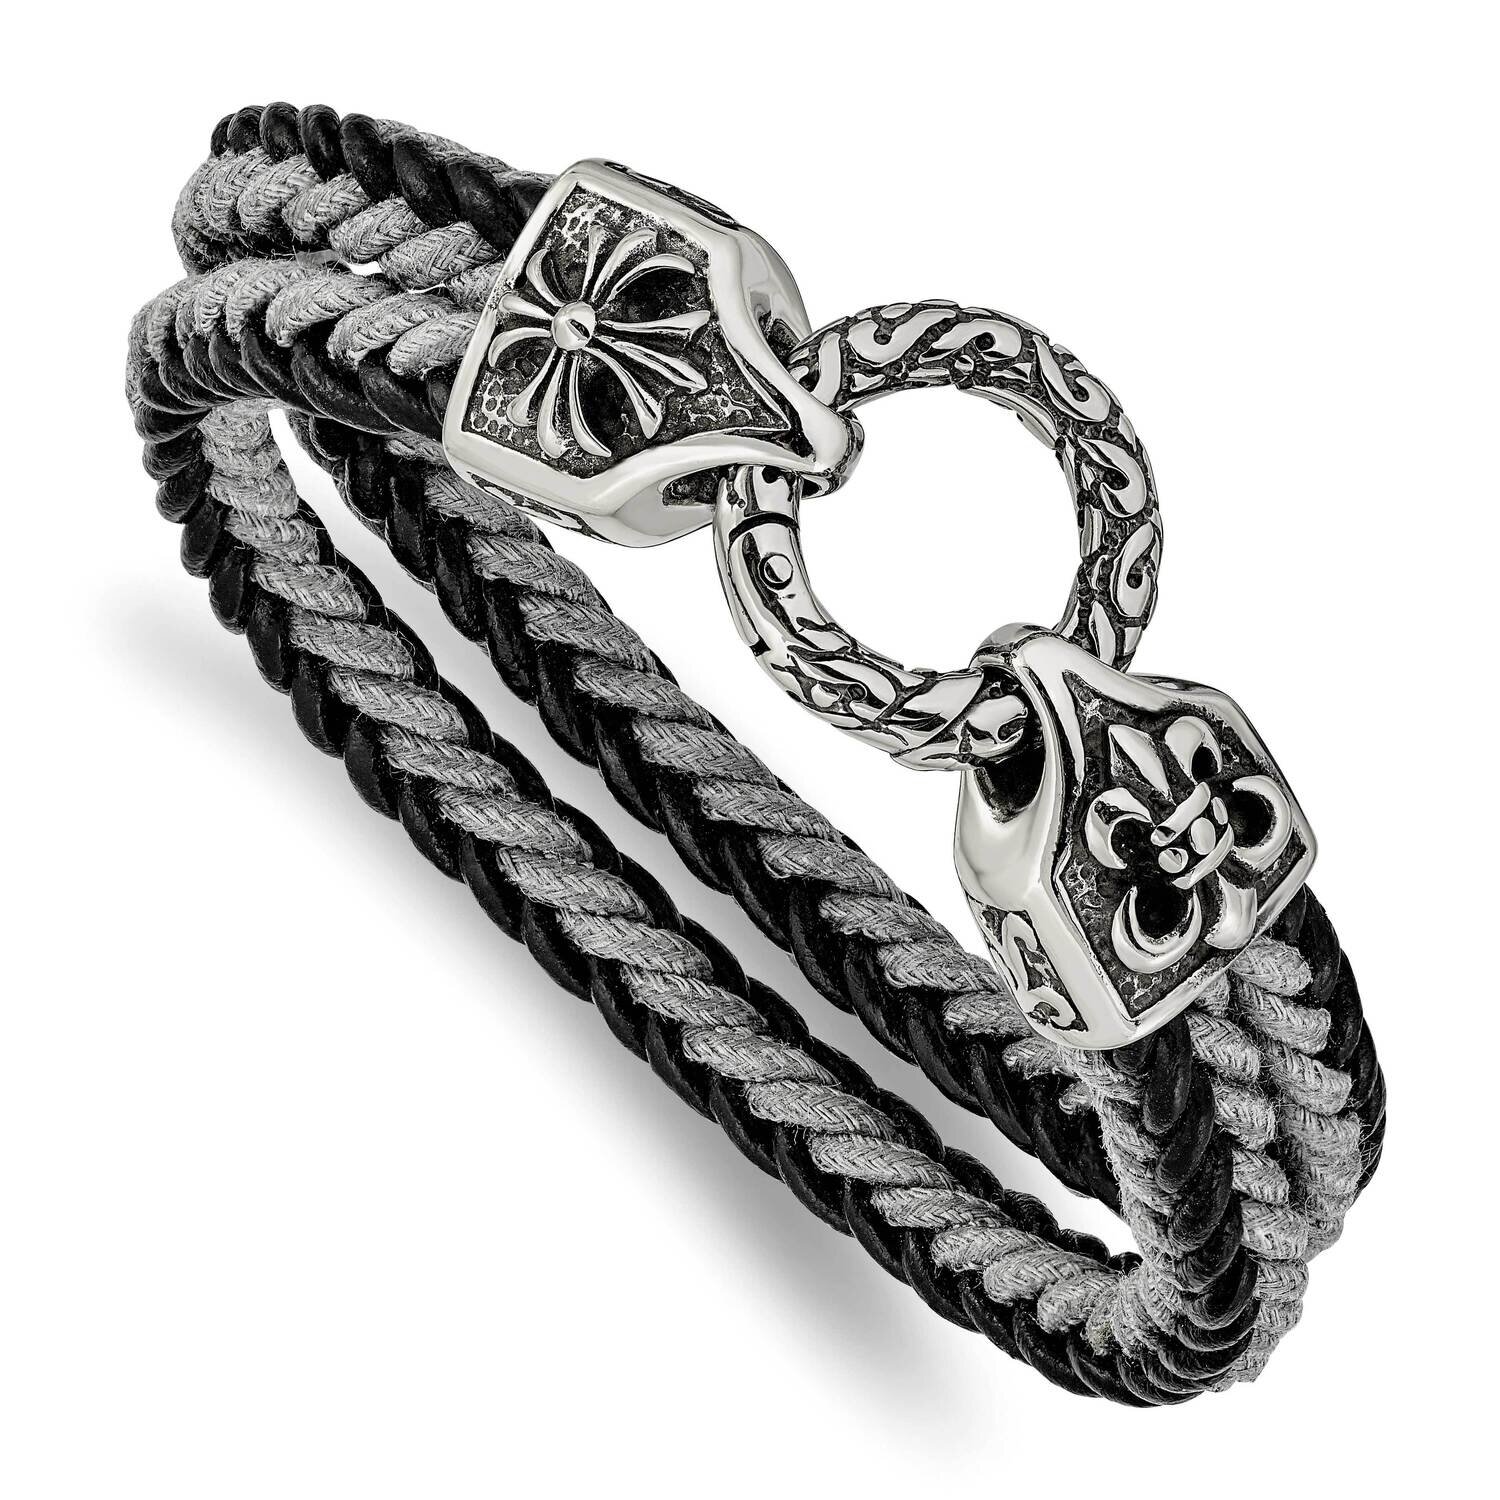 Polished Leather Cotton Braided 8 Inch Bracelet Stainless Steel Antiqued SRB2455-8